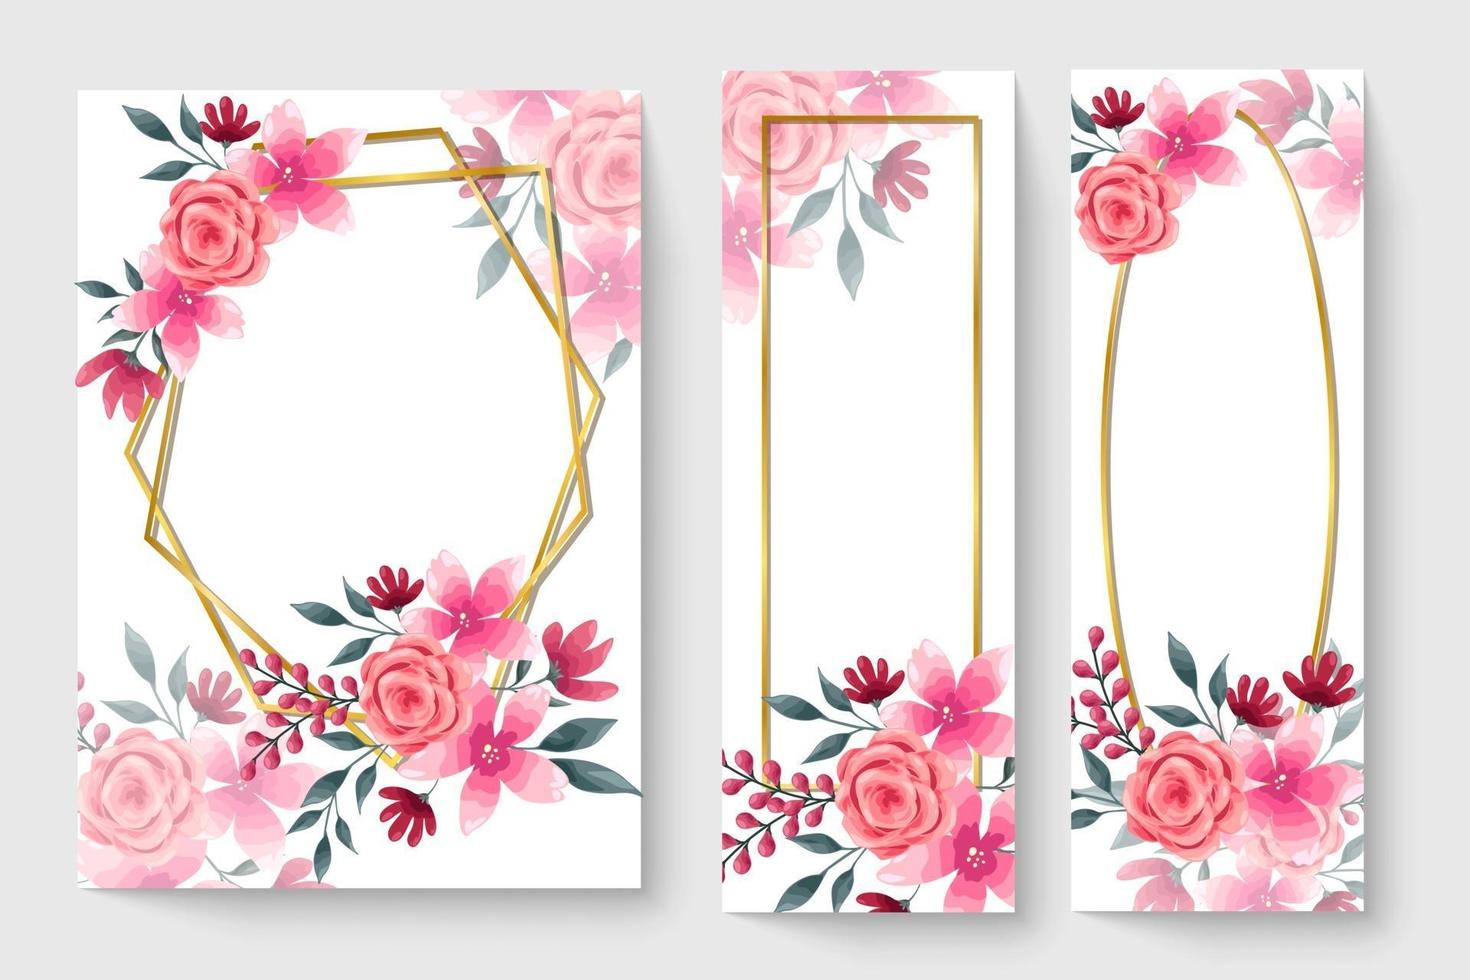 botanic card with pink flowers, leaves. Spring ornament concept ...